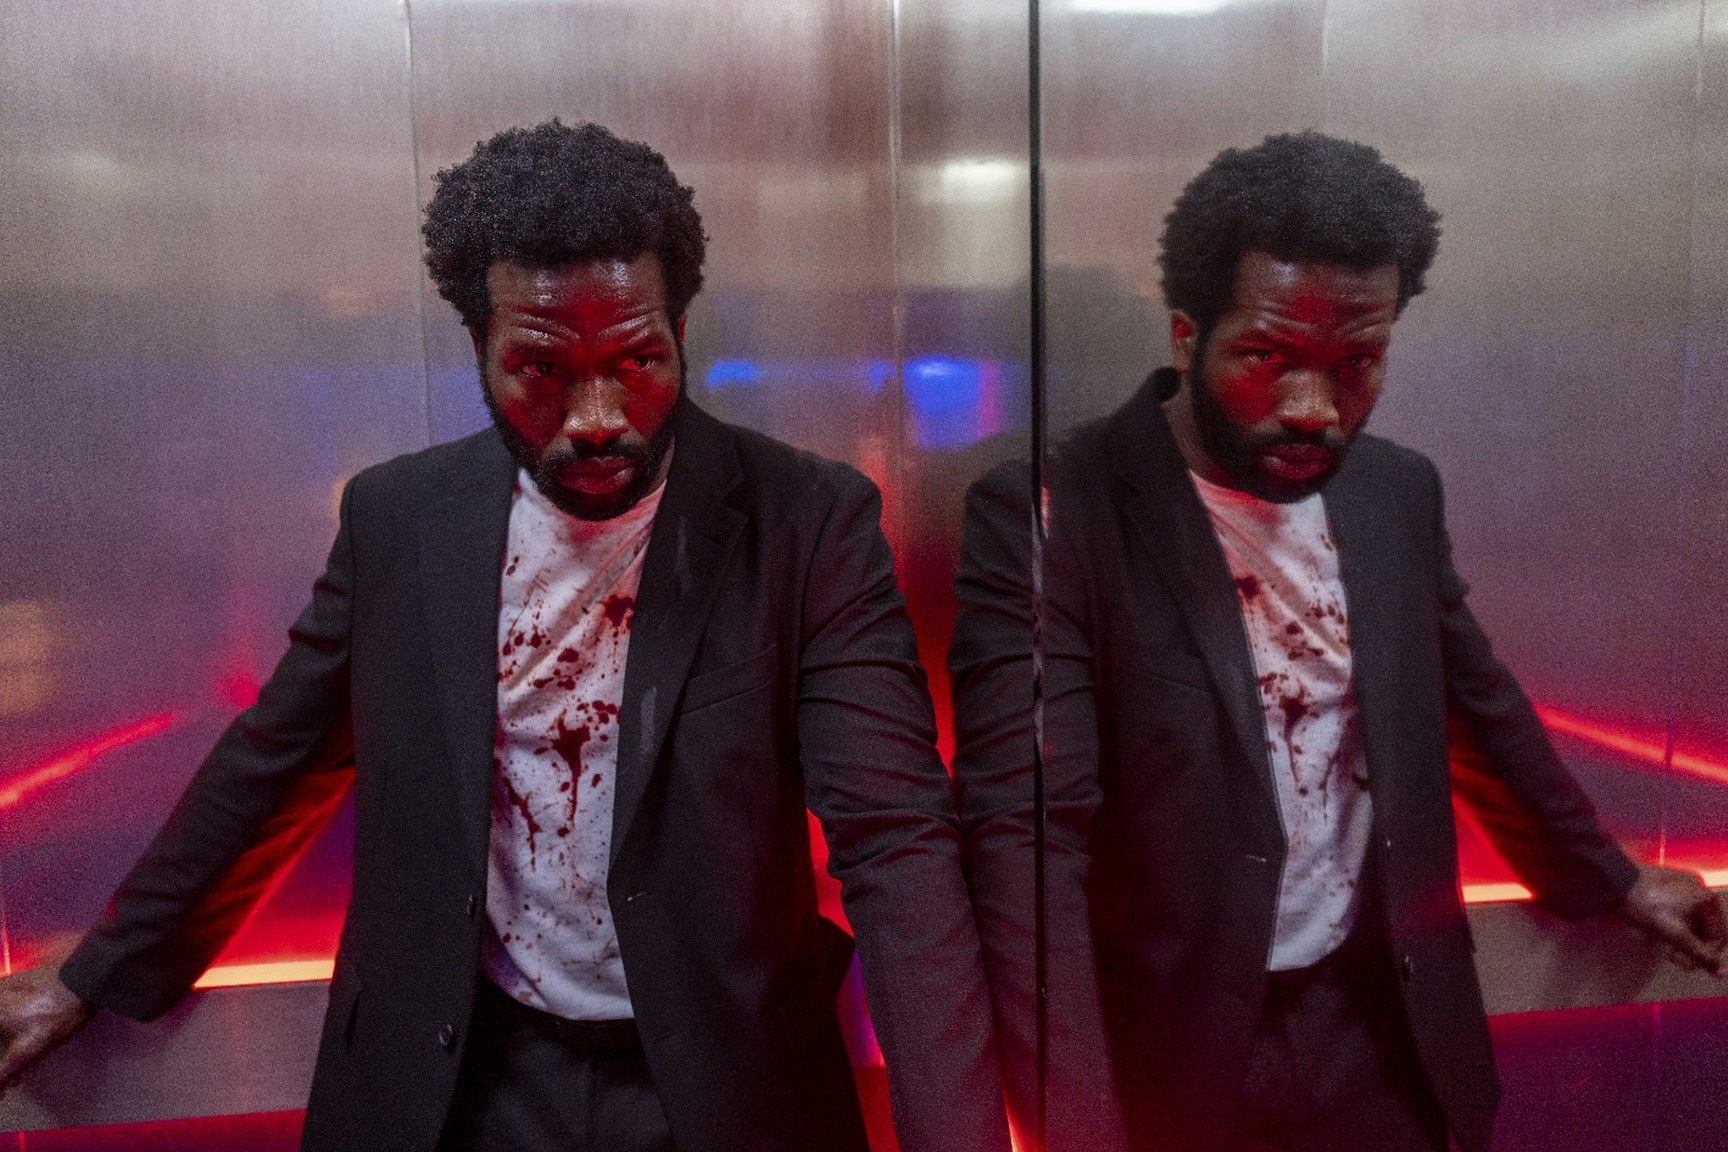 A tired and bloodied man looks at his reflection on the walls of an elevator